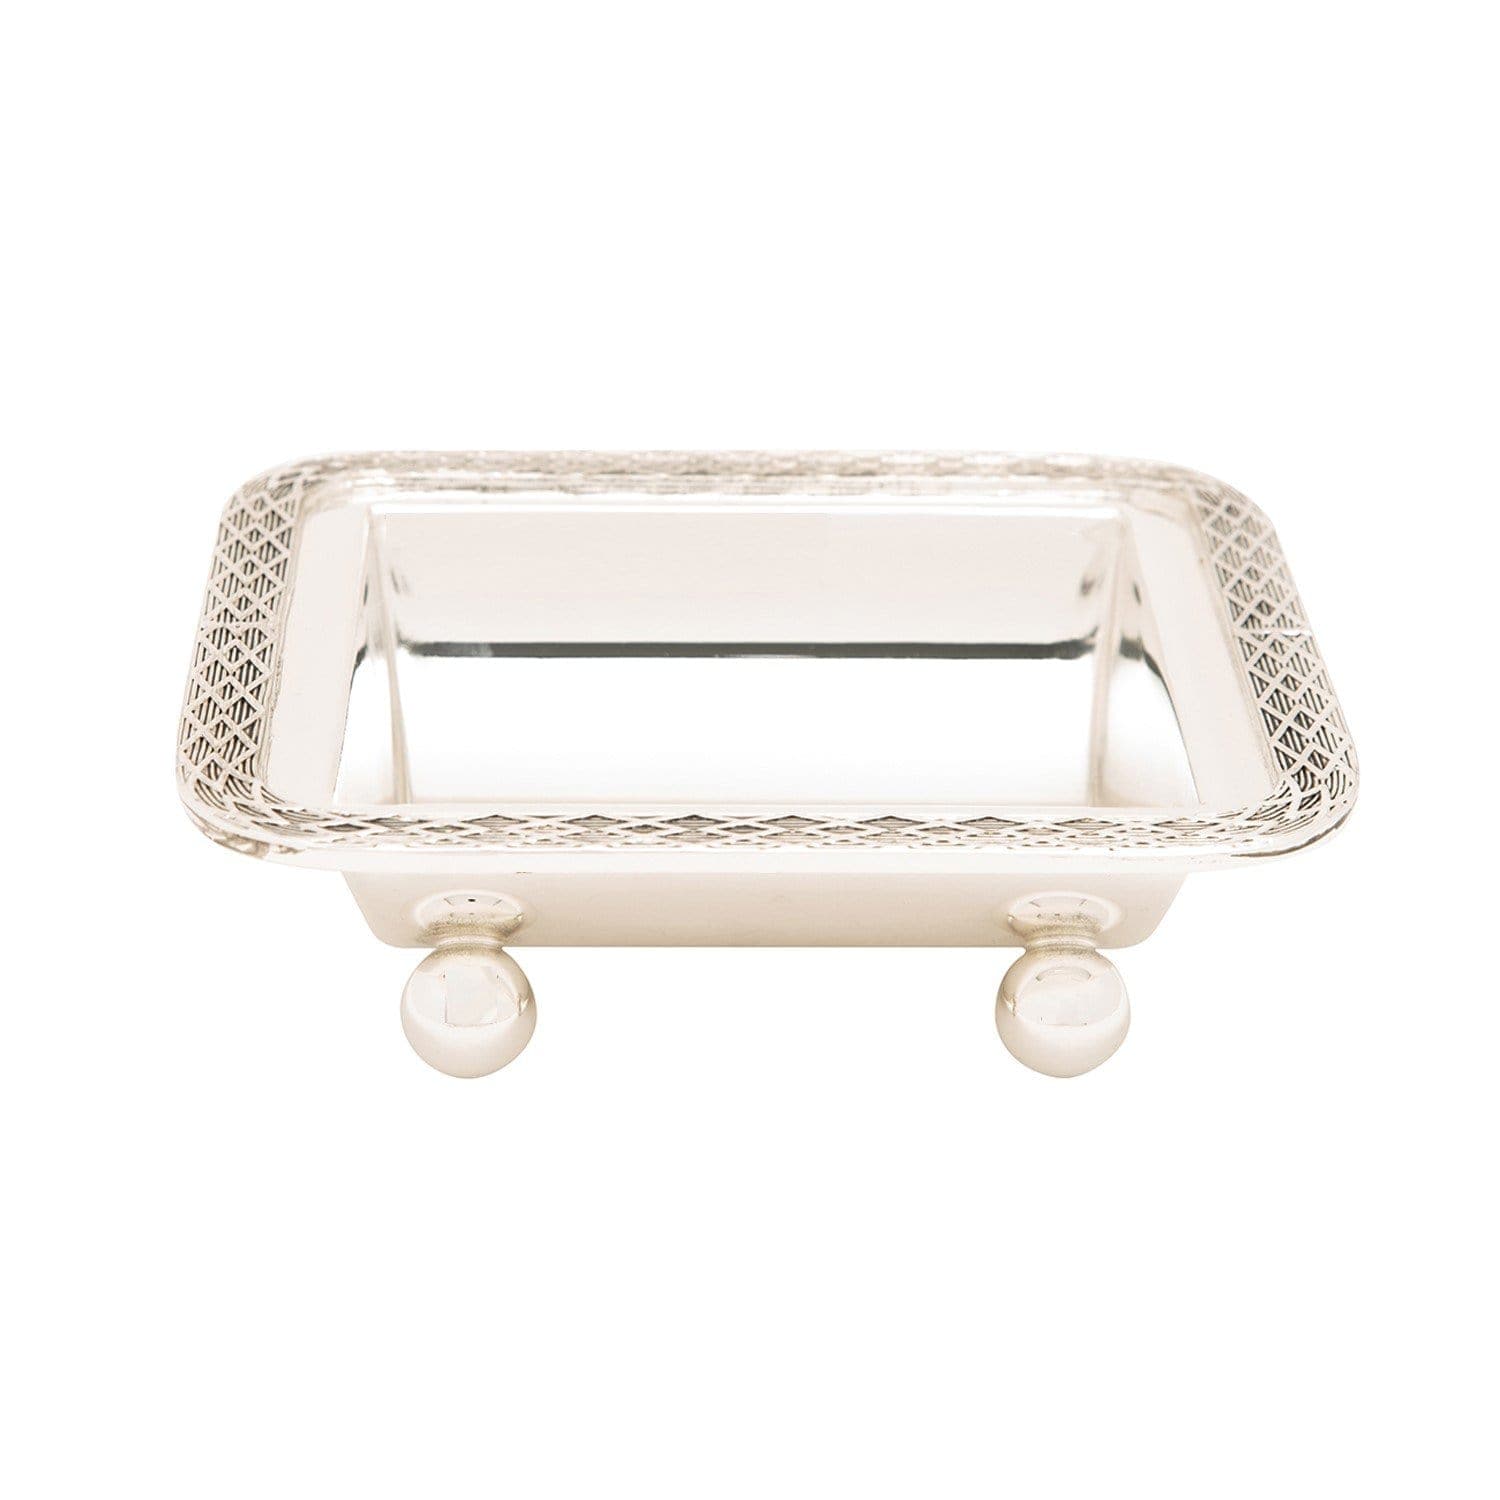 SILVER PLATED OBLONG DISH